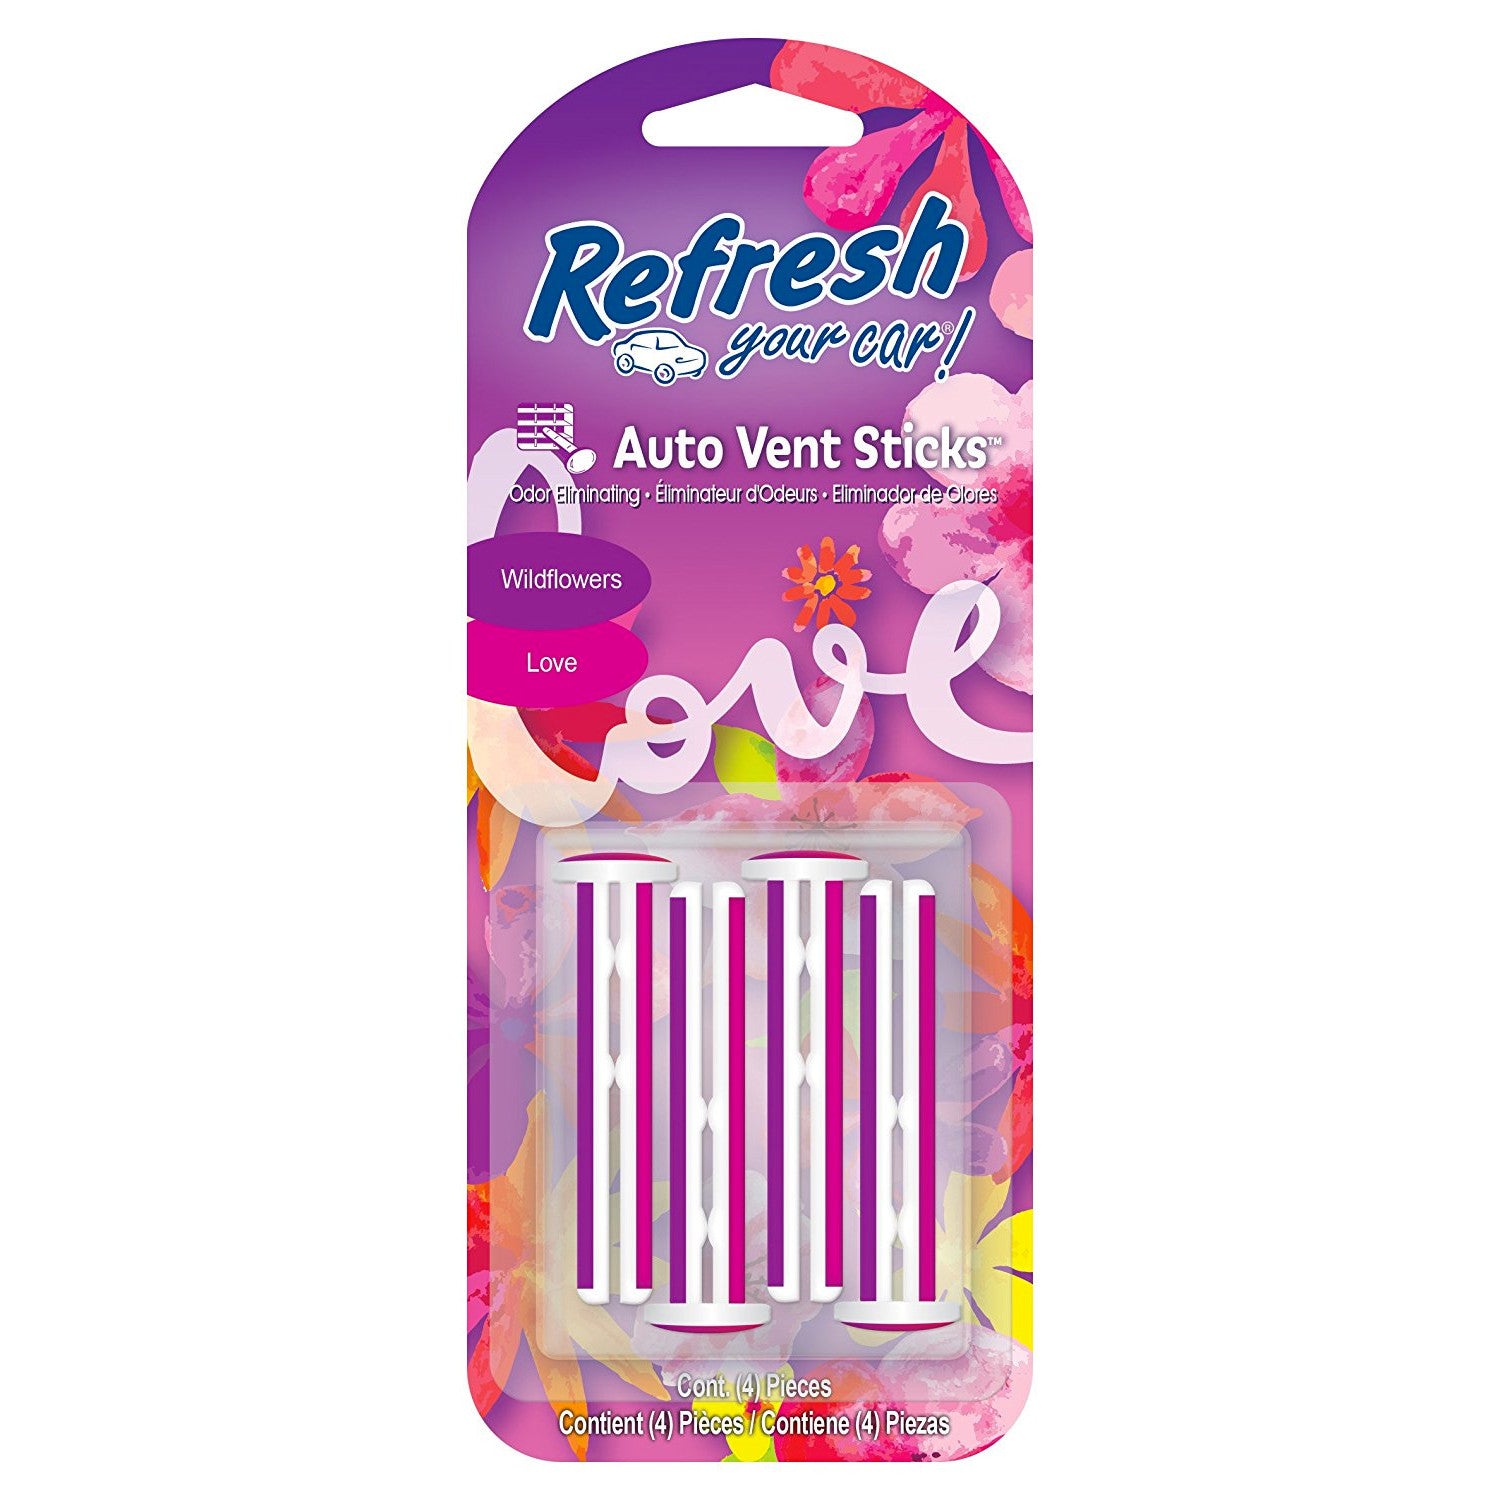 Refresh Auto Vent Sticks Car Air Freshener, Wildflowers/Love Scent by GOSO  Direct